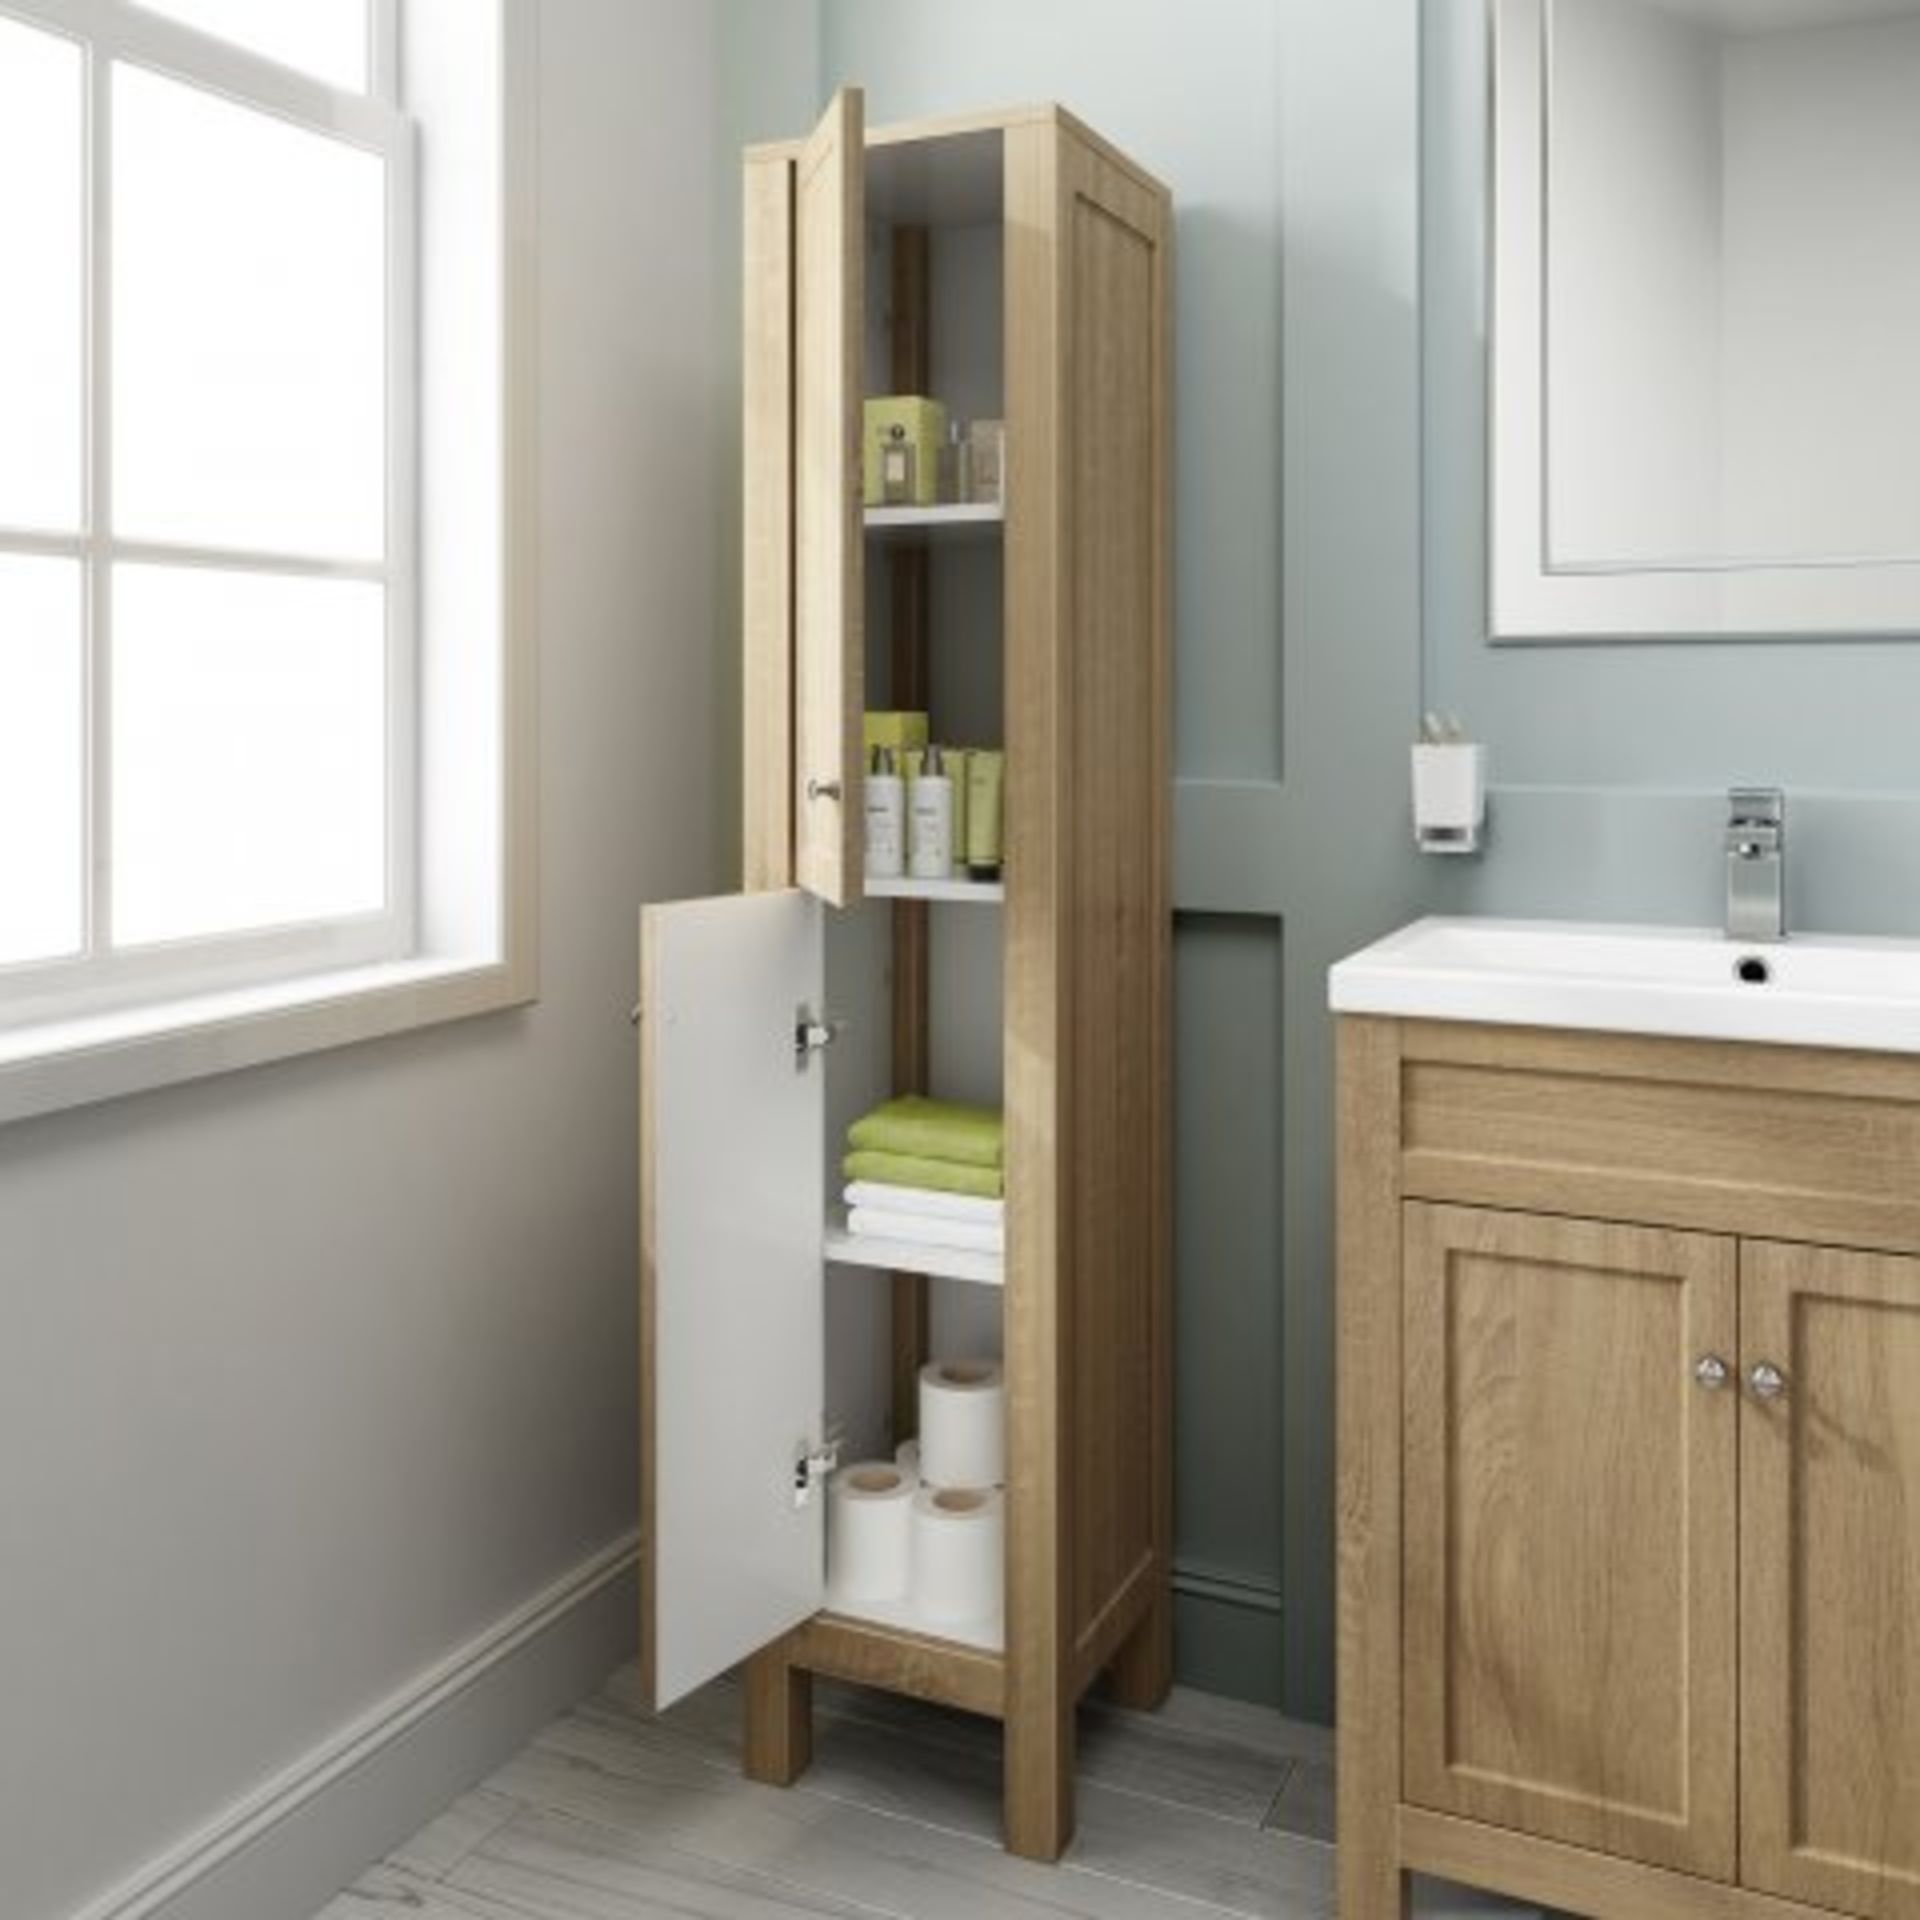 (H19) 1600mm Melbourne Oak Effect Tall Storage Unit - Floor Standing. RRP £374.99. This state-of- - Image 2 of 4